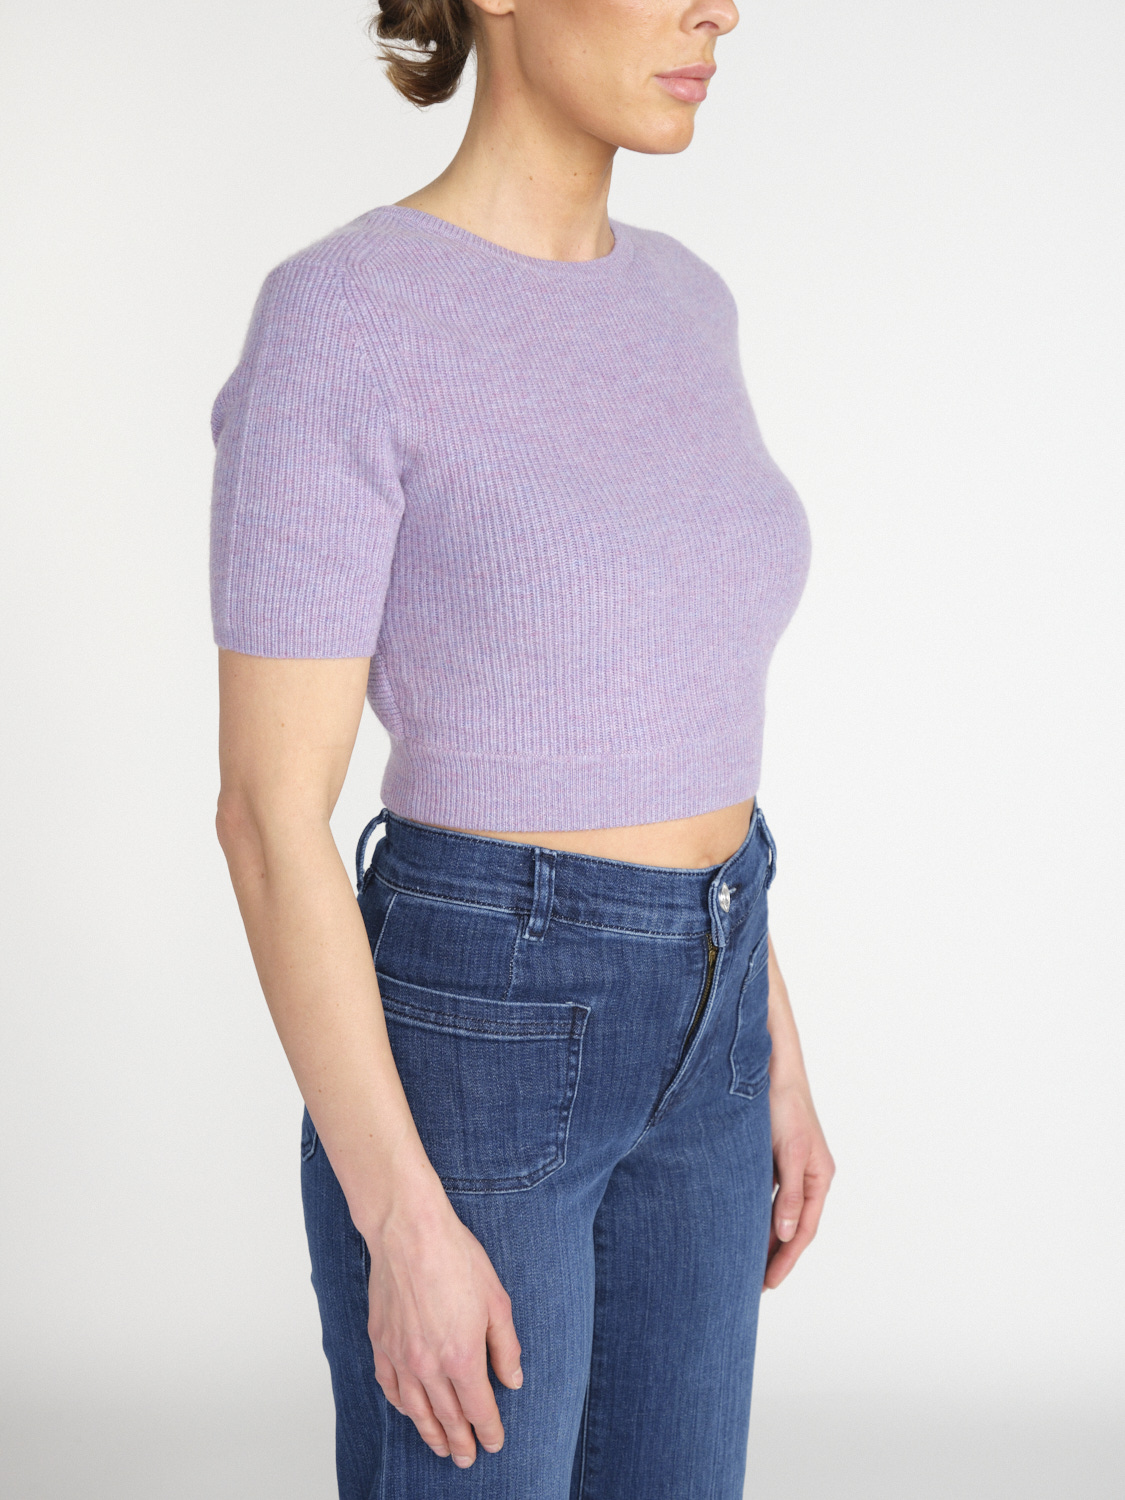 Lisa Yang Josefina - Short-sleeved cashmere sweater with cut-out at the back  lila XS/S